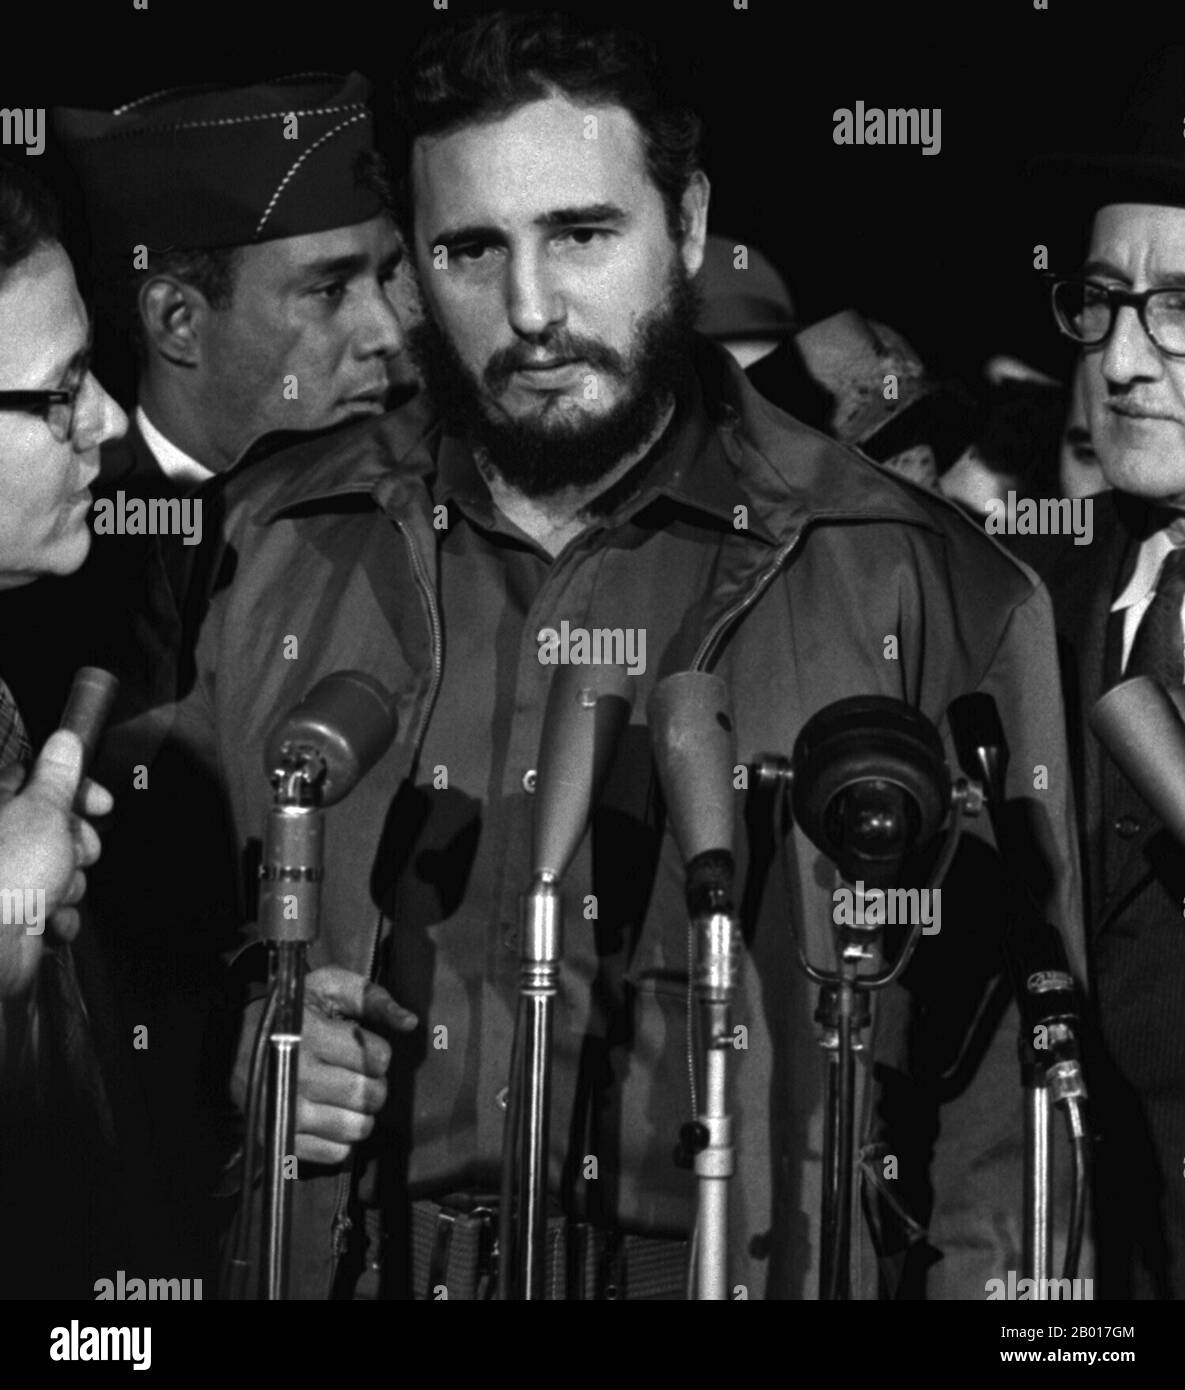 USA /Cuba: Fidel Castro arrives in Washington DC. Photo by Warren K. Leffler (1939 -), 15 April 1959 (Public Domain).  Fidel Alejandro Castro Ruz (13 August 1926 - 25 November 2016) was a Cuban political leader and former communist revolutionary. As the primary leader of the Cuban Revolution, Castro served as the Prime Minister of Cuba from February 1959 to December 1976, and then as the President of the Council of State of Cuba and the President of Council of Ministers of Cuba until his resignation from the office in February 2008. Stock Photo